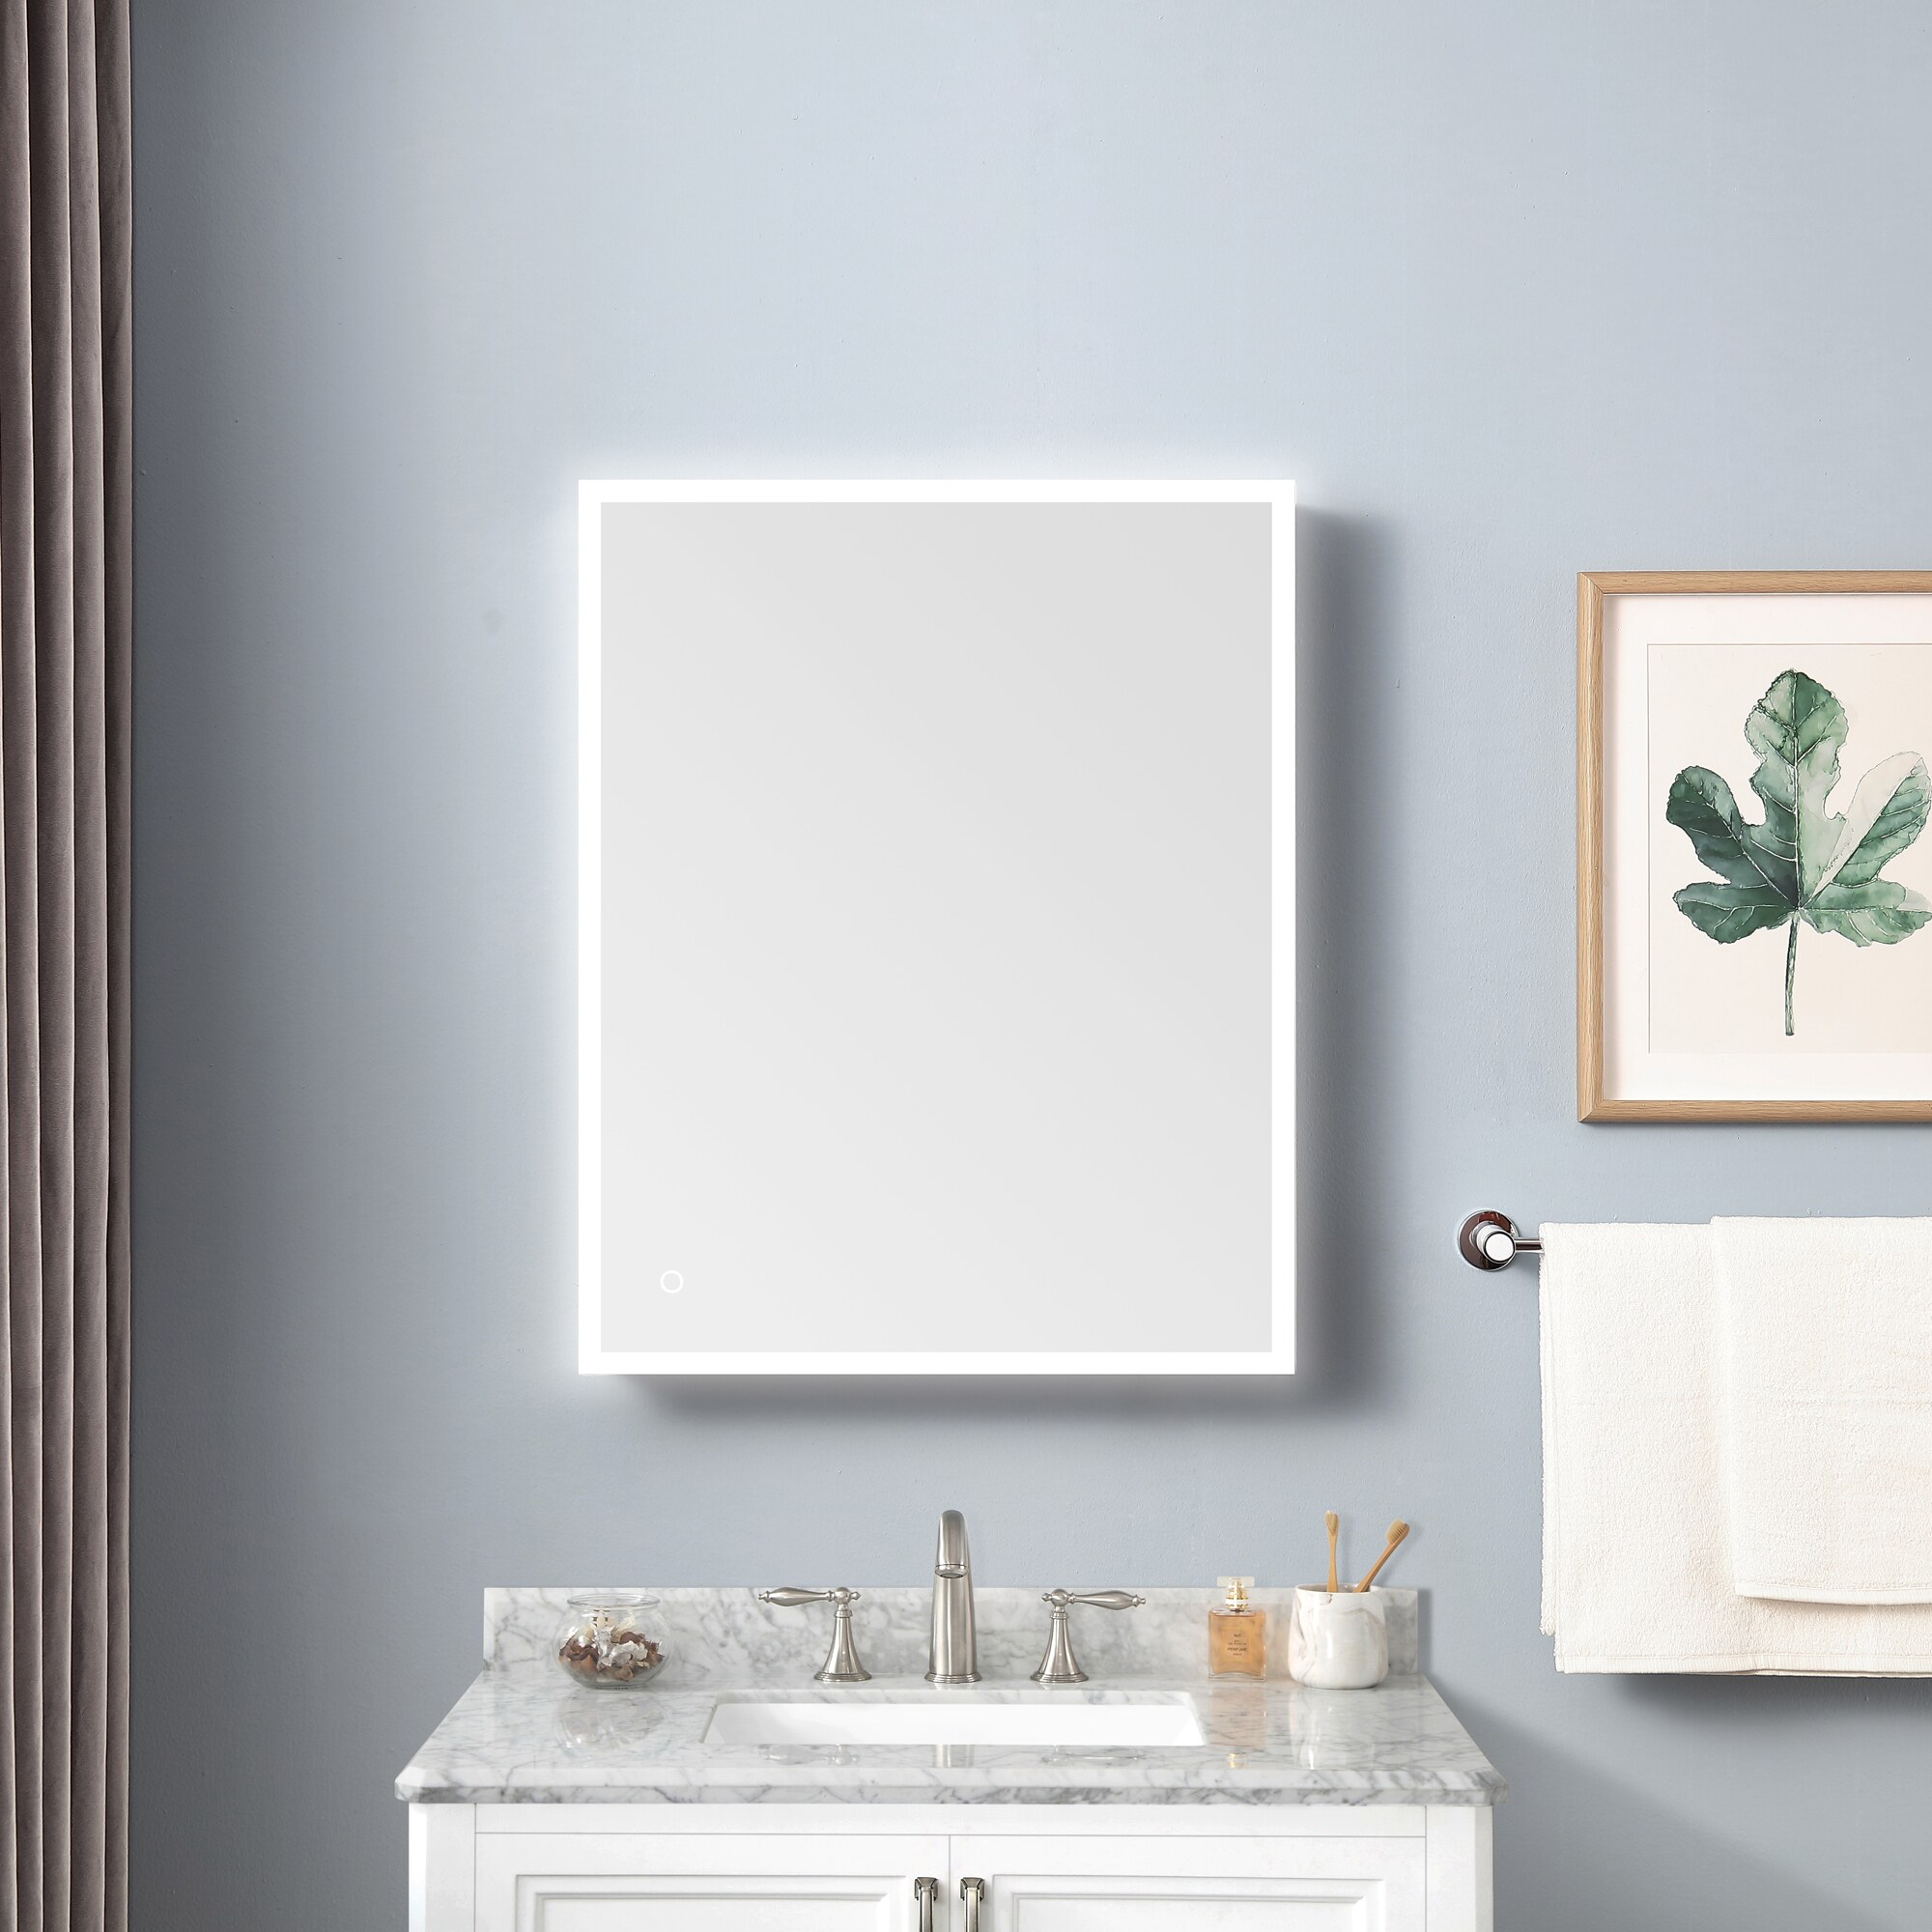 White Surface Wall Mount Glass Door Cabinet Home Bathroom Storage Furniture 